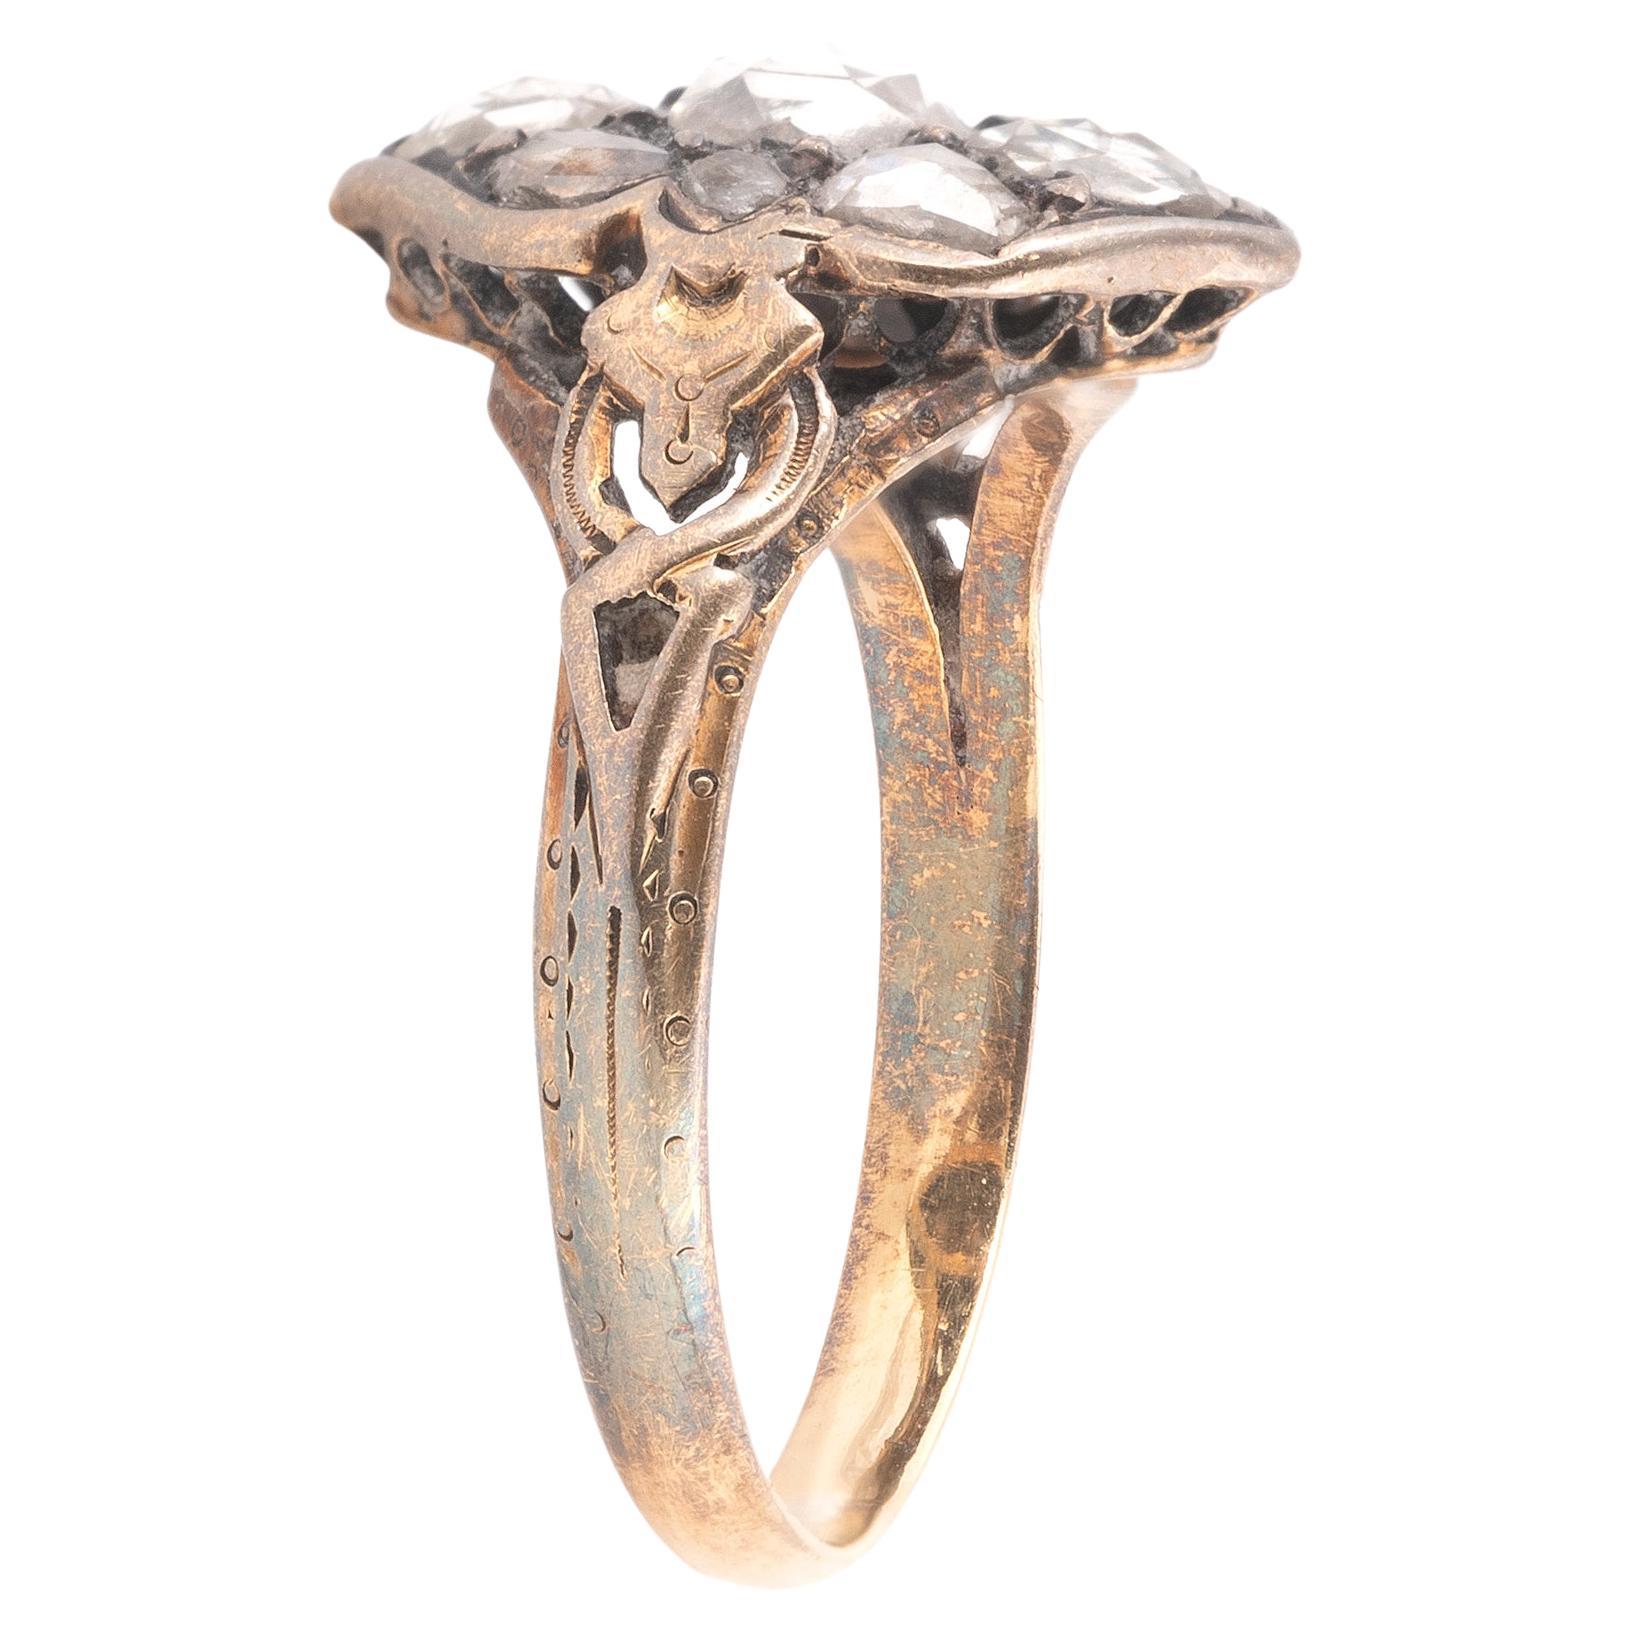 The ring is set with 9 individual rose cut stones varying in size and form.
Circa 1790
US size 7 1/2
Weight: 3.5gr